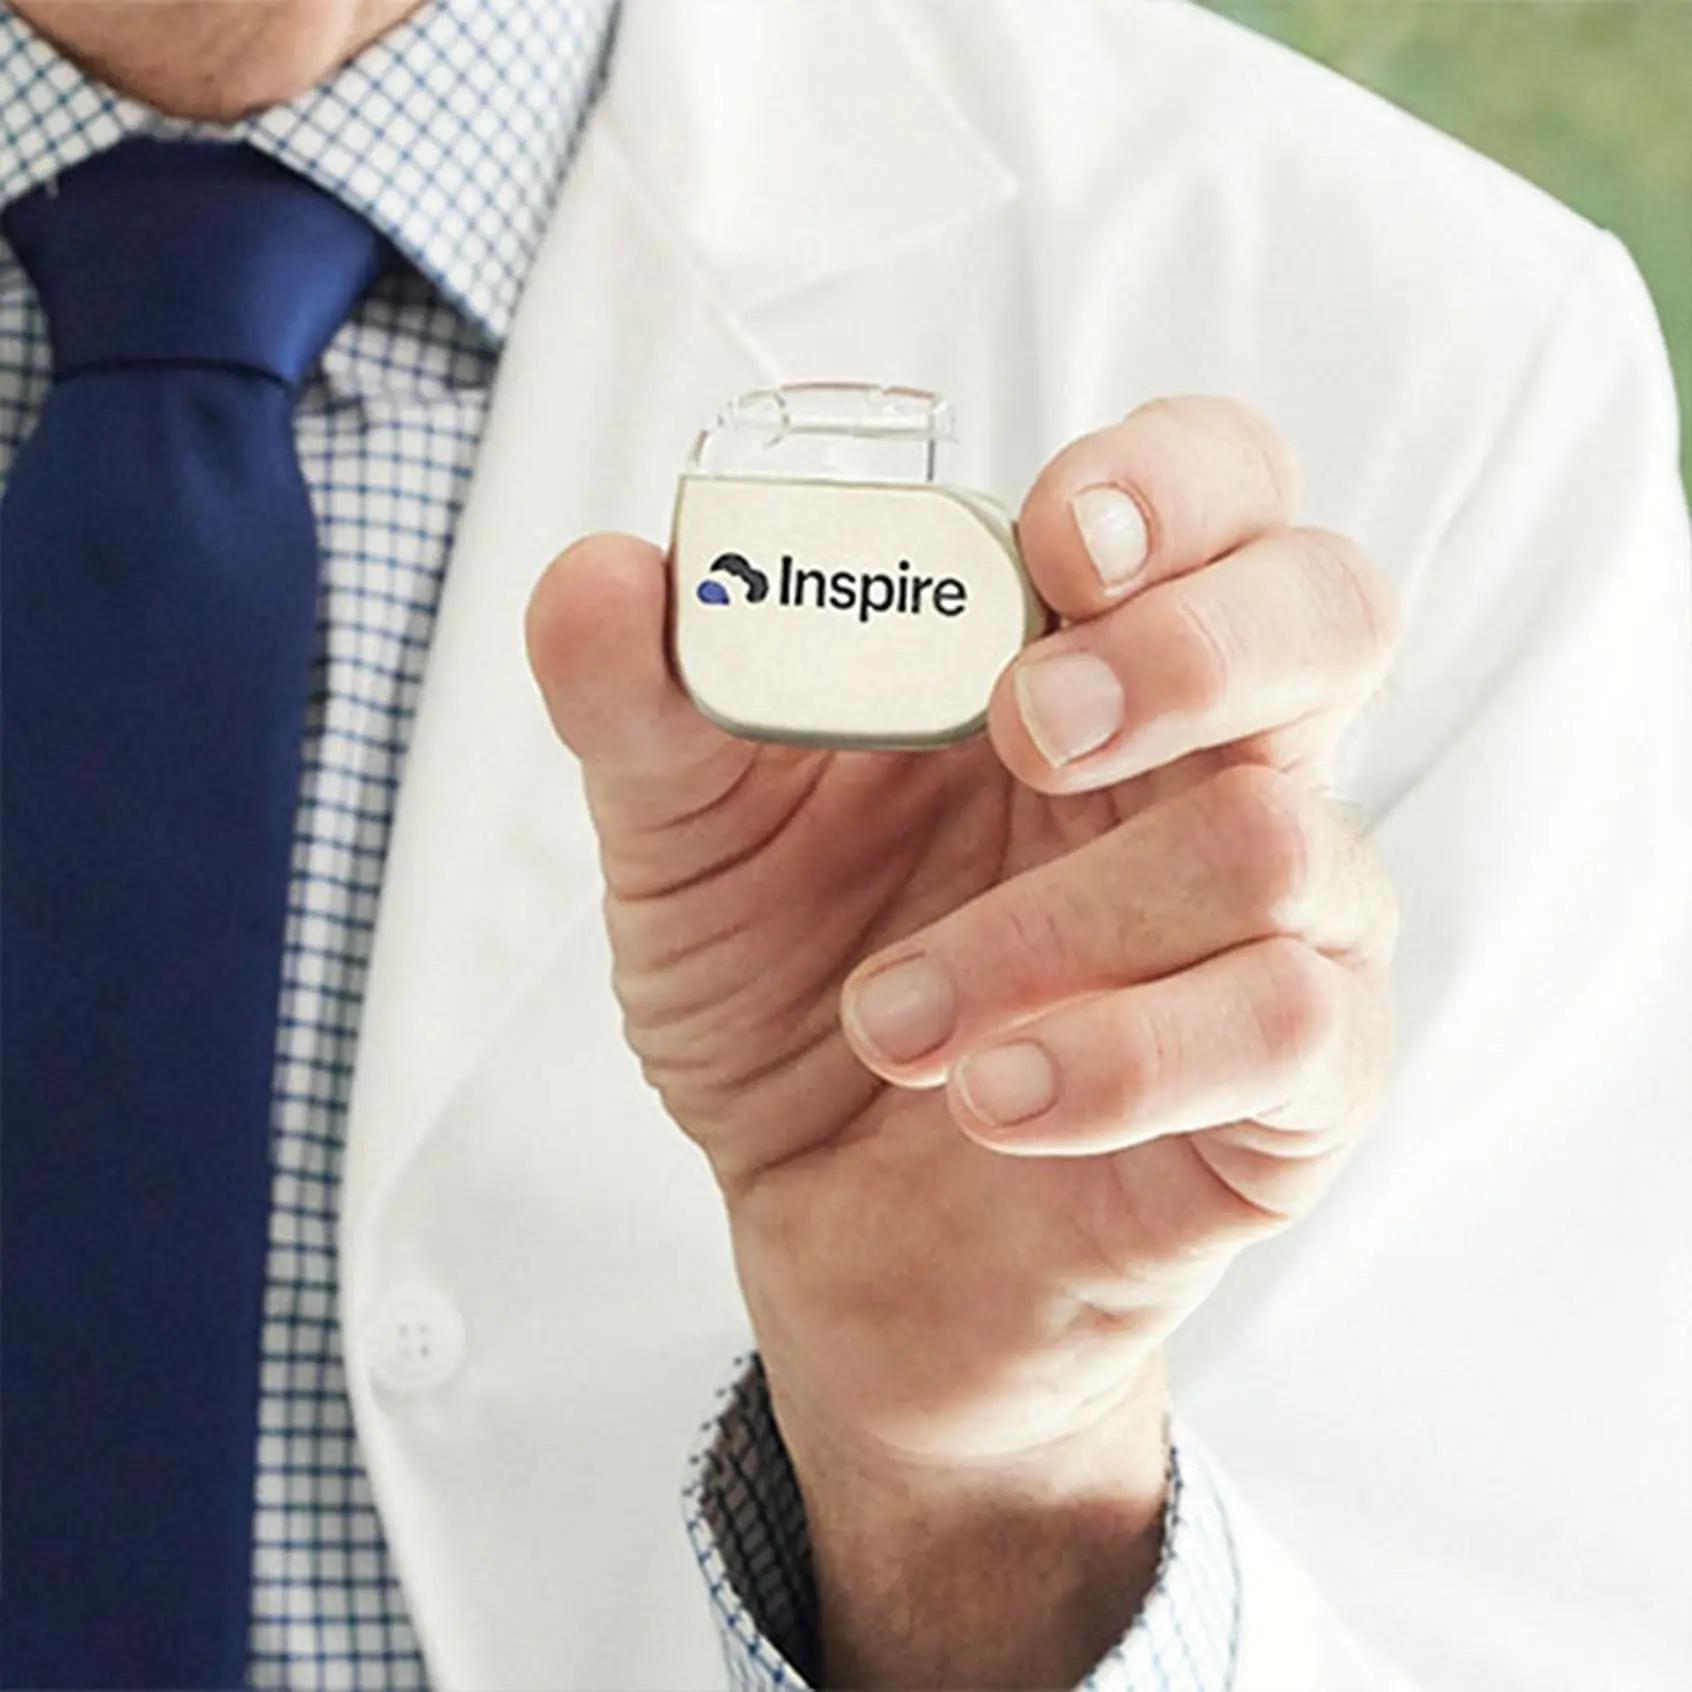 The image shows a doctor holding an Inspire implant.